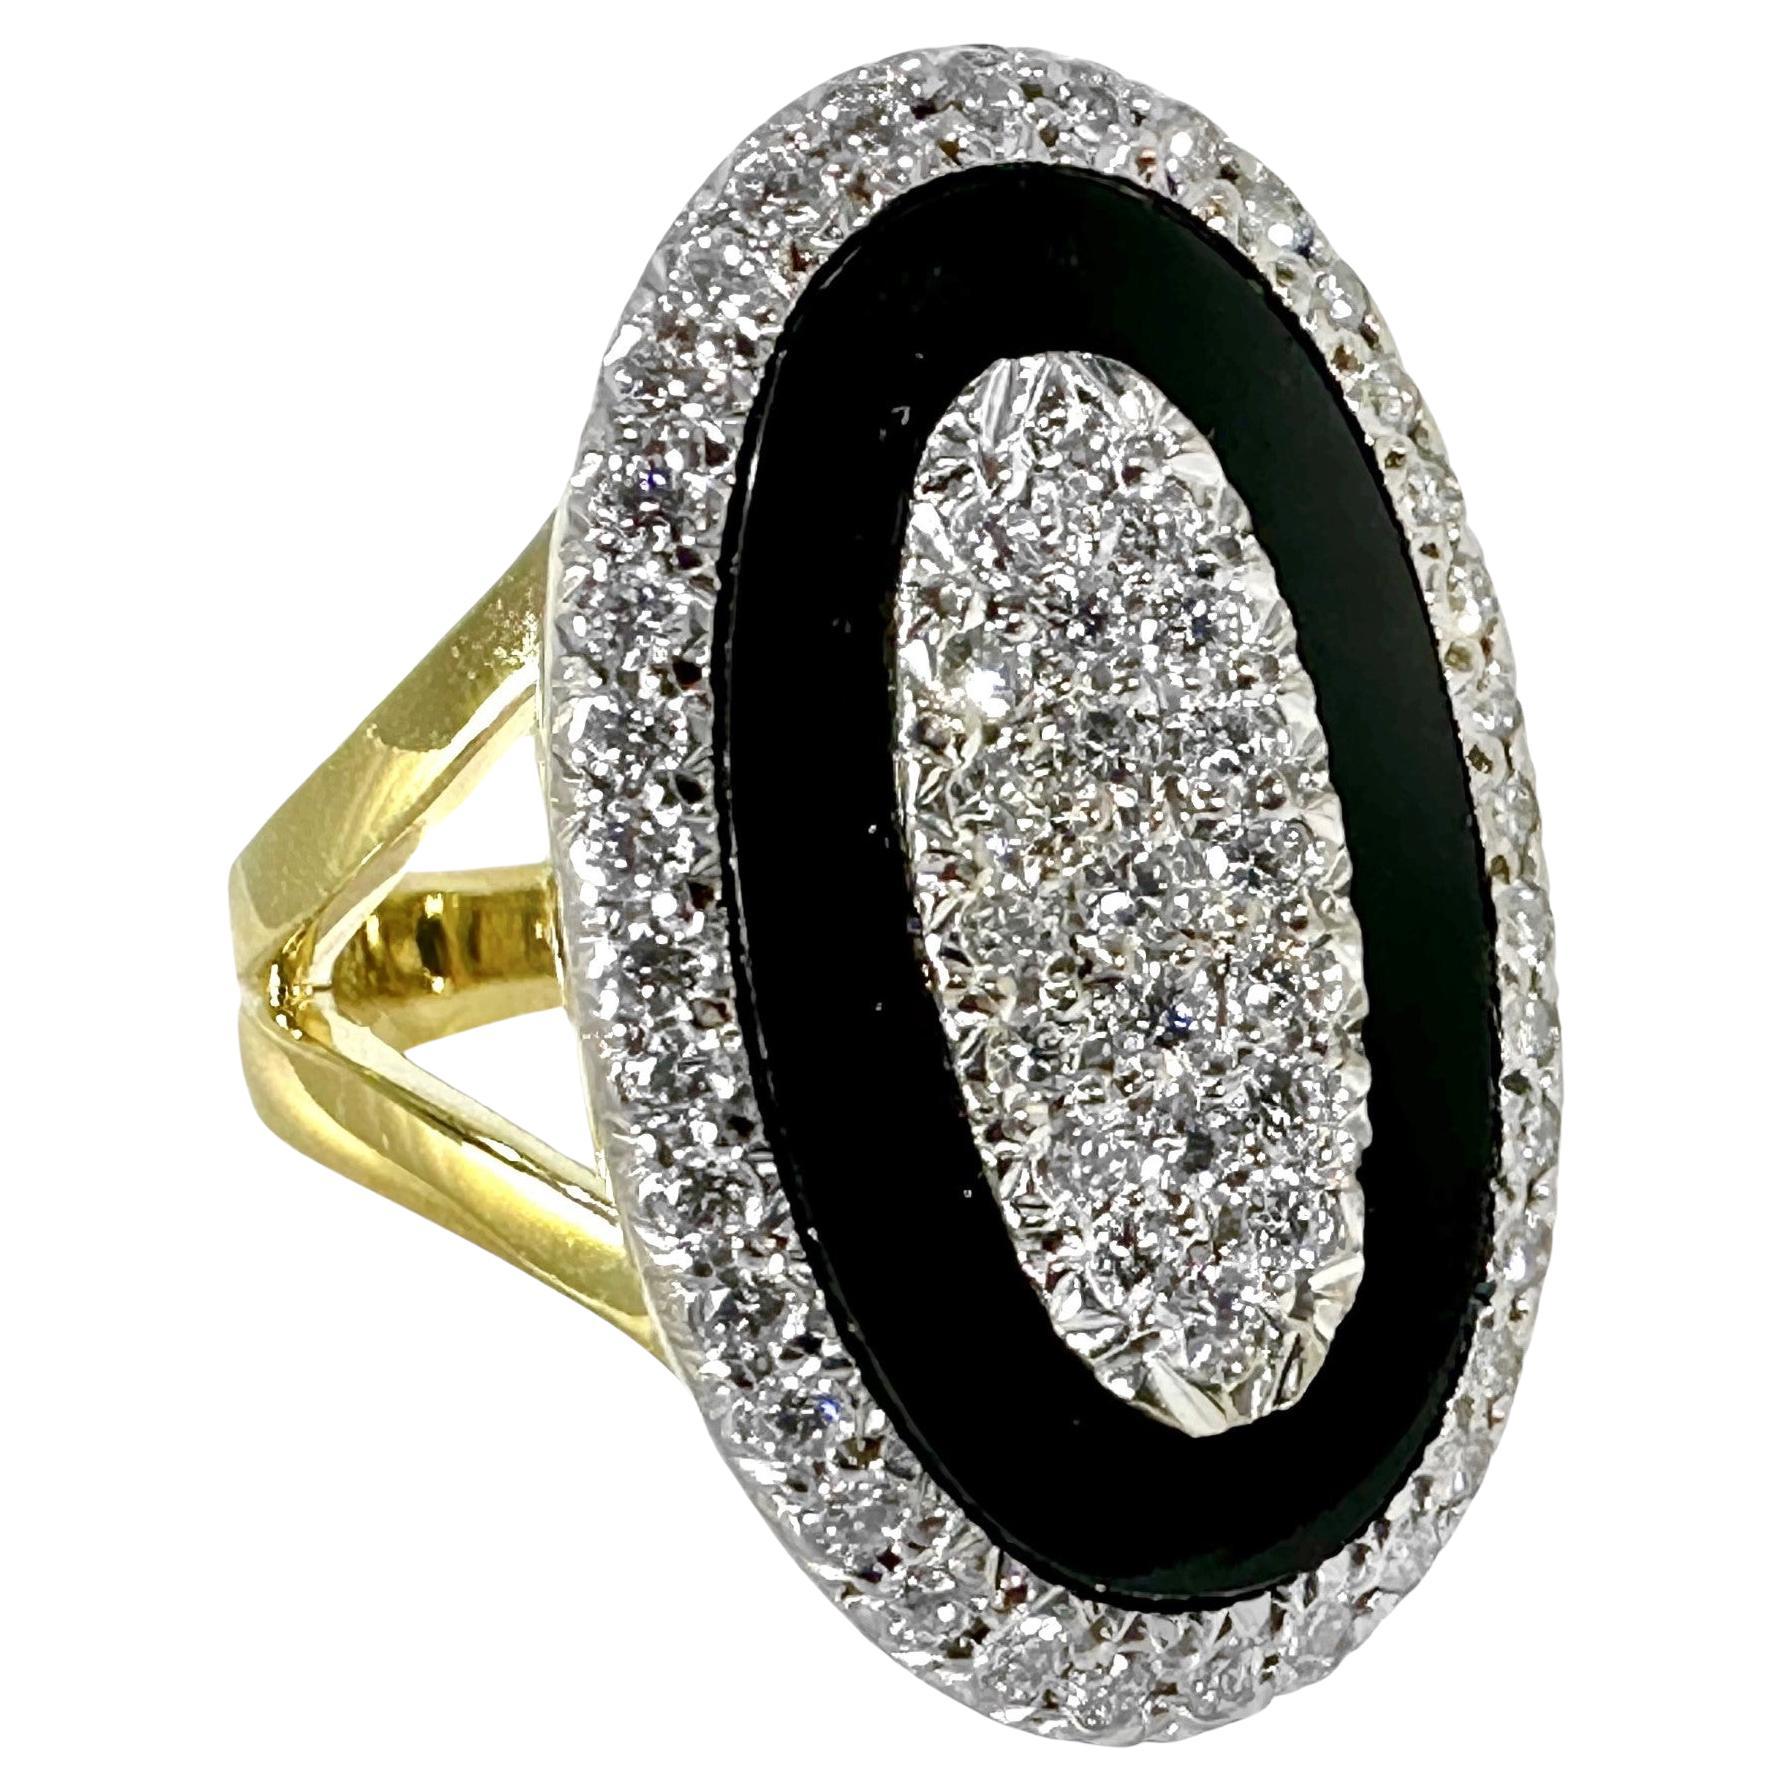 Onyx, Diamond and 18K Gold, Oval Shaped Ring 1 Inch Long x 5/8 Inch Wide